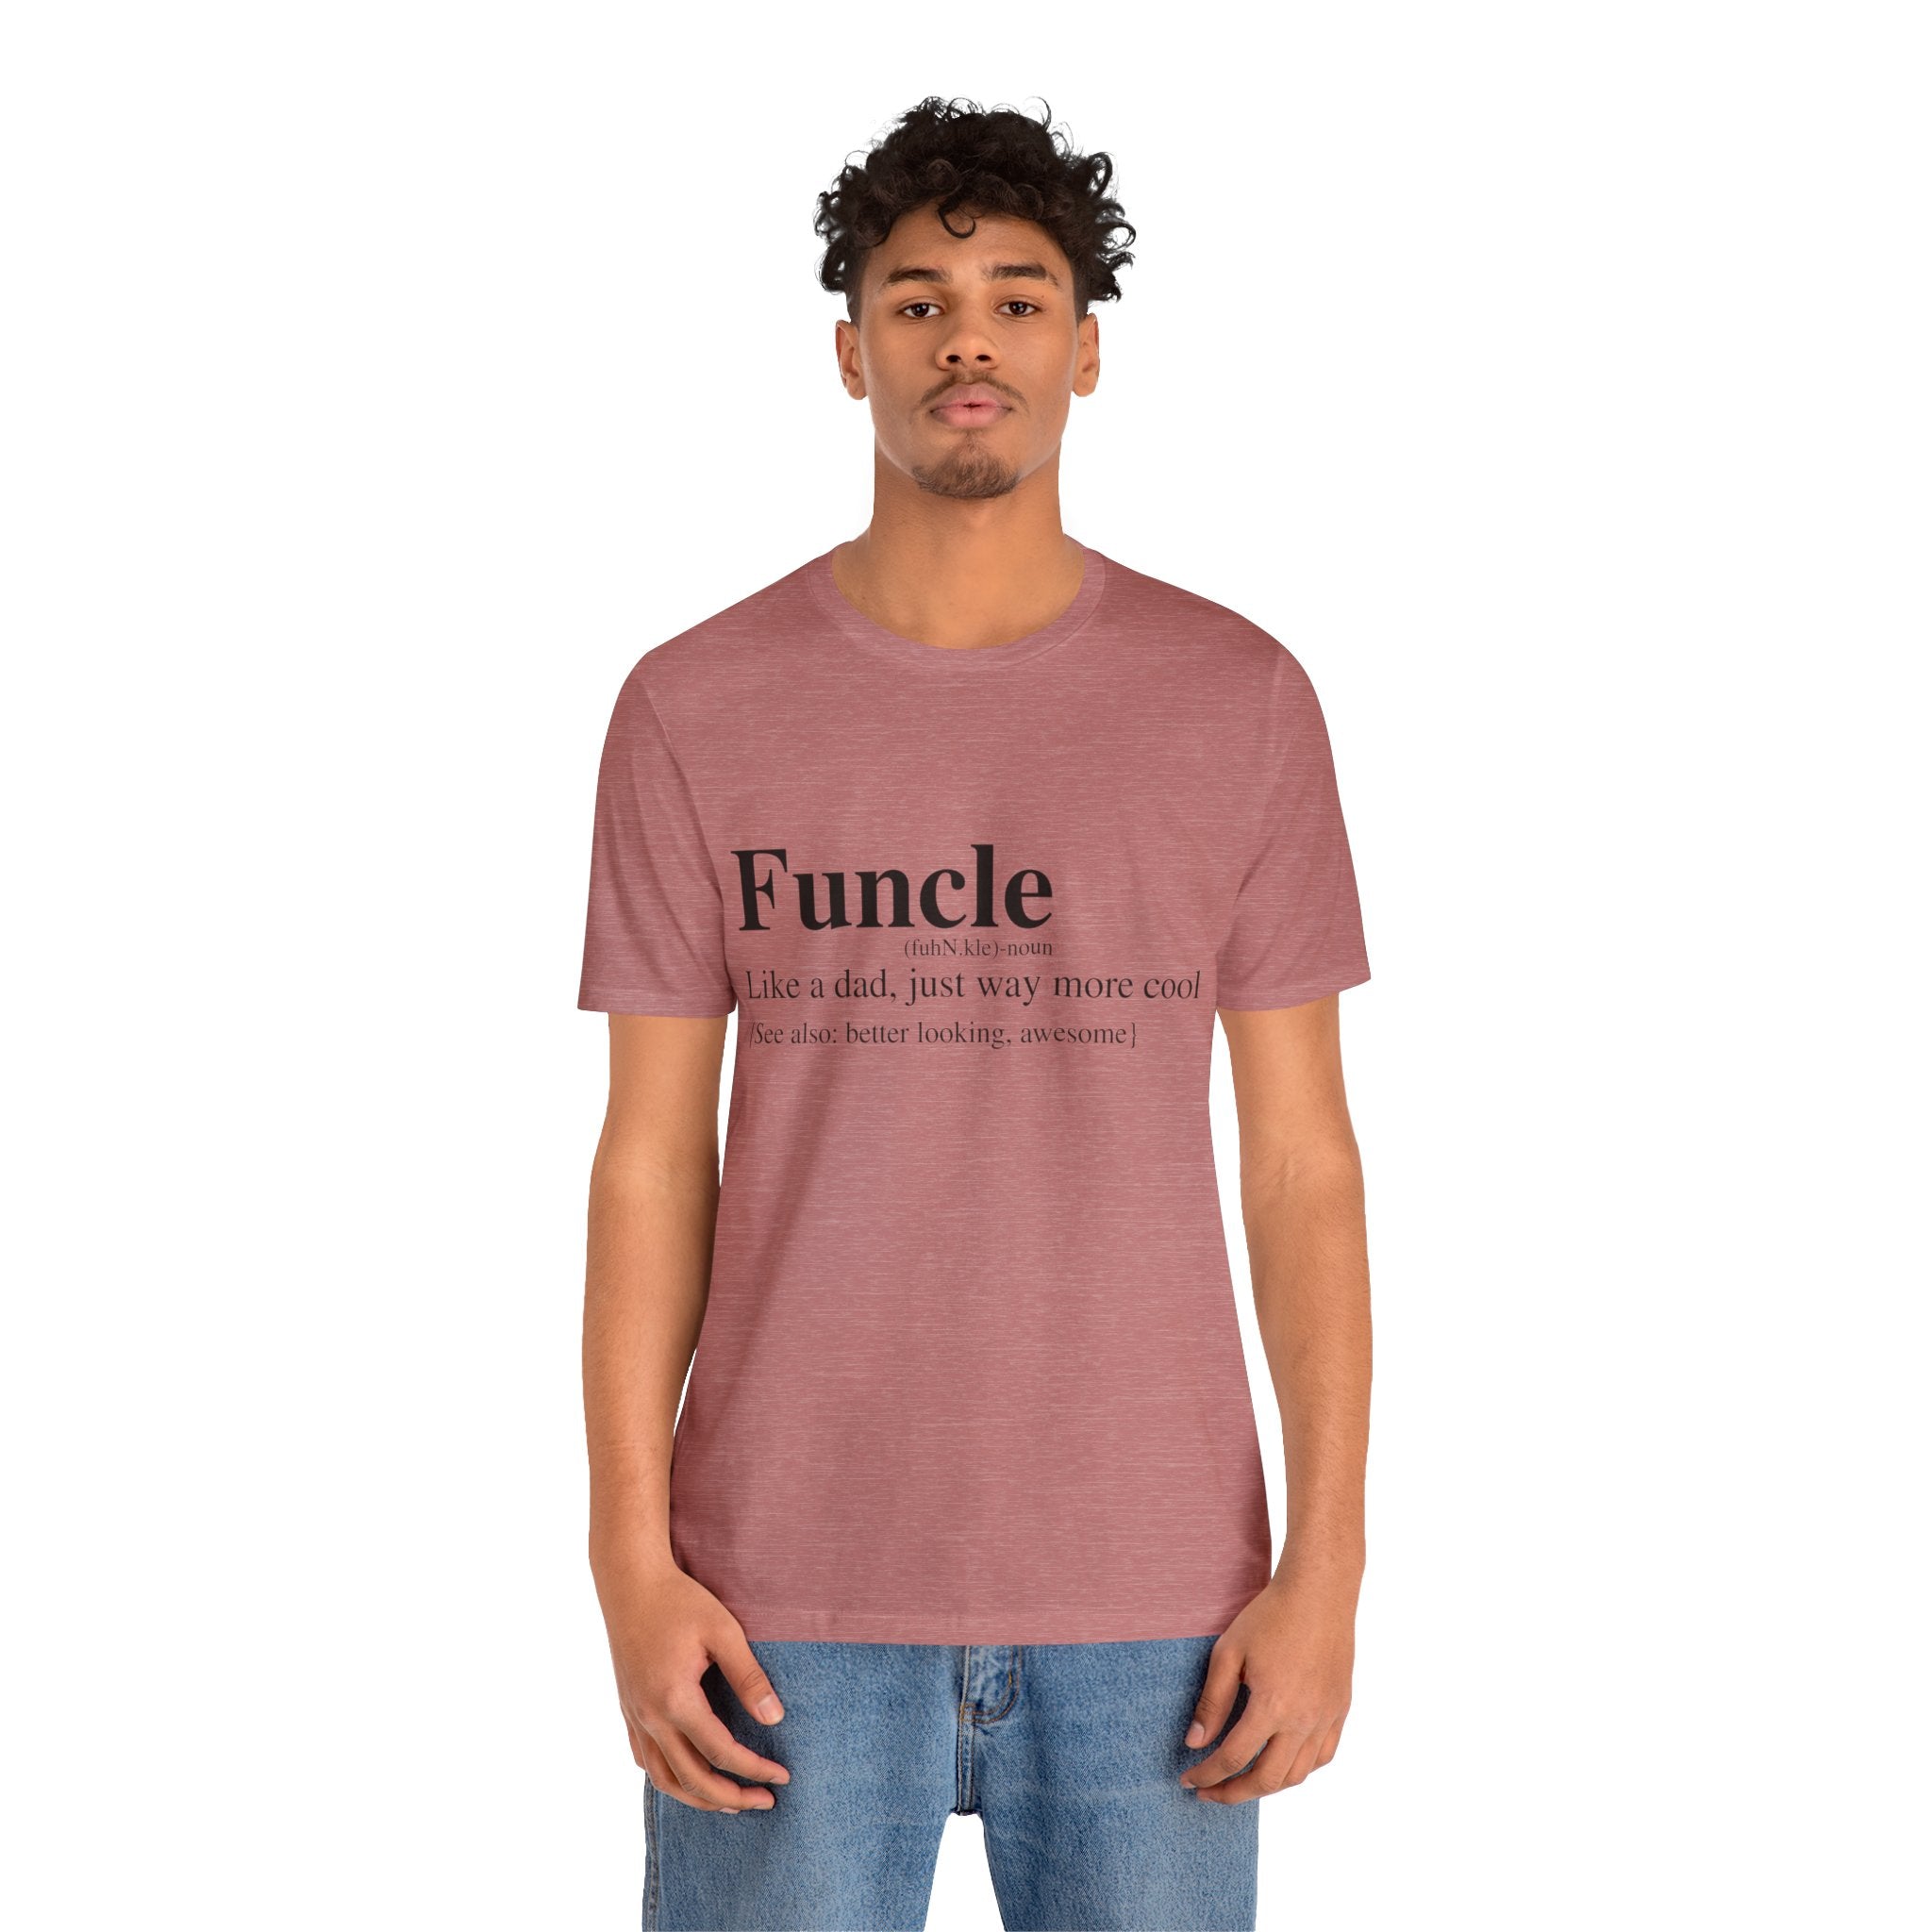 Young man wearing a Funcle T-Shirt with "Funcle: like a dad, just way more cool because i’m better looking, awesome!" printed on it, standing against a plain background.